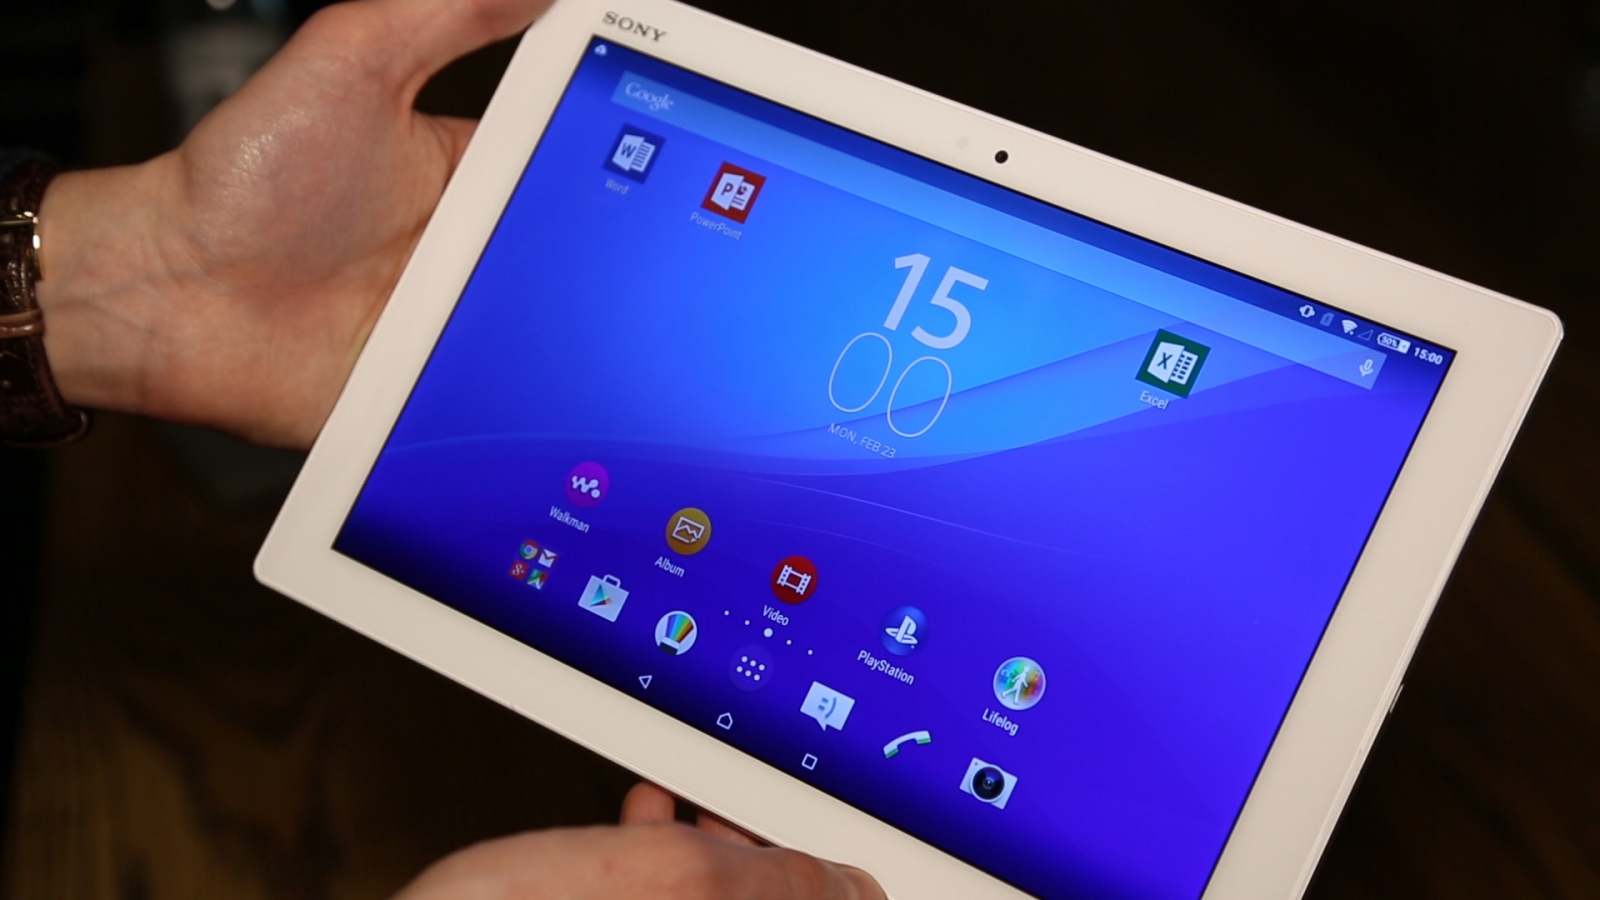 Xperia Z4 Tablet Sony Takes On Apple Ipad Air 2 With Qhd Screen And Super Slim Design